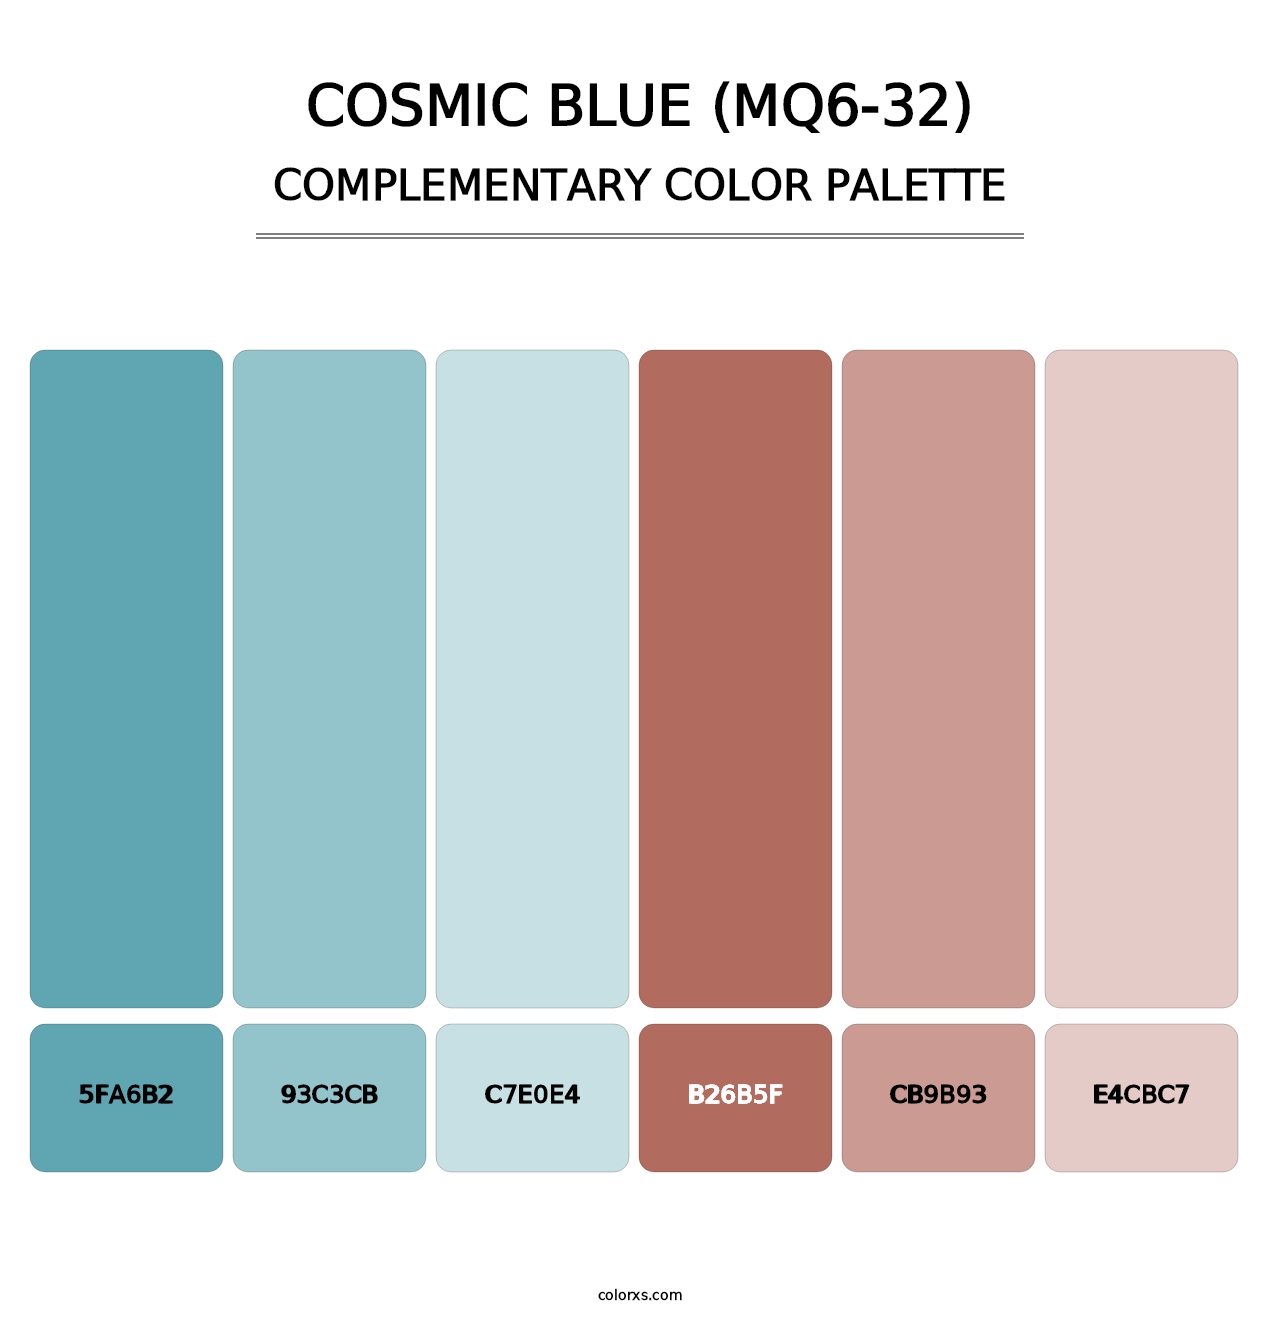 Cosmic Blue (MQ6-32) - Complementary Color Palette